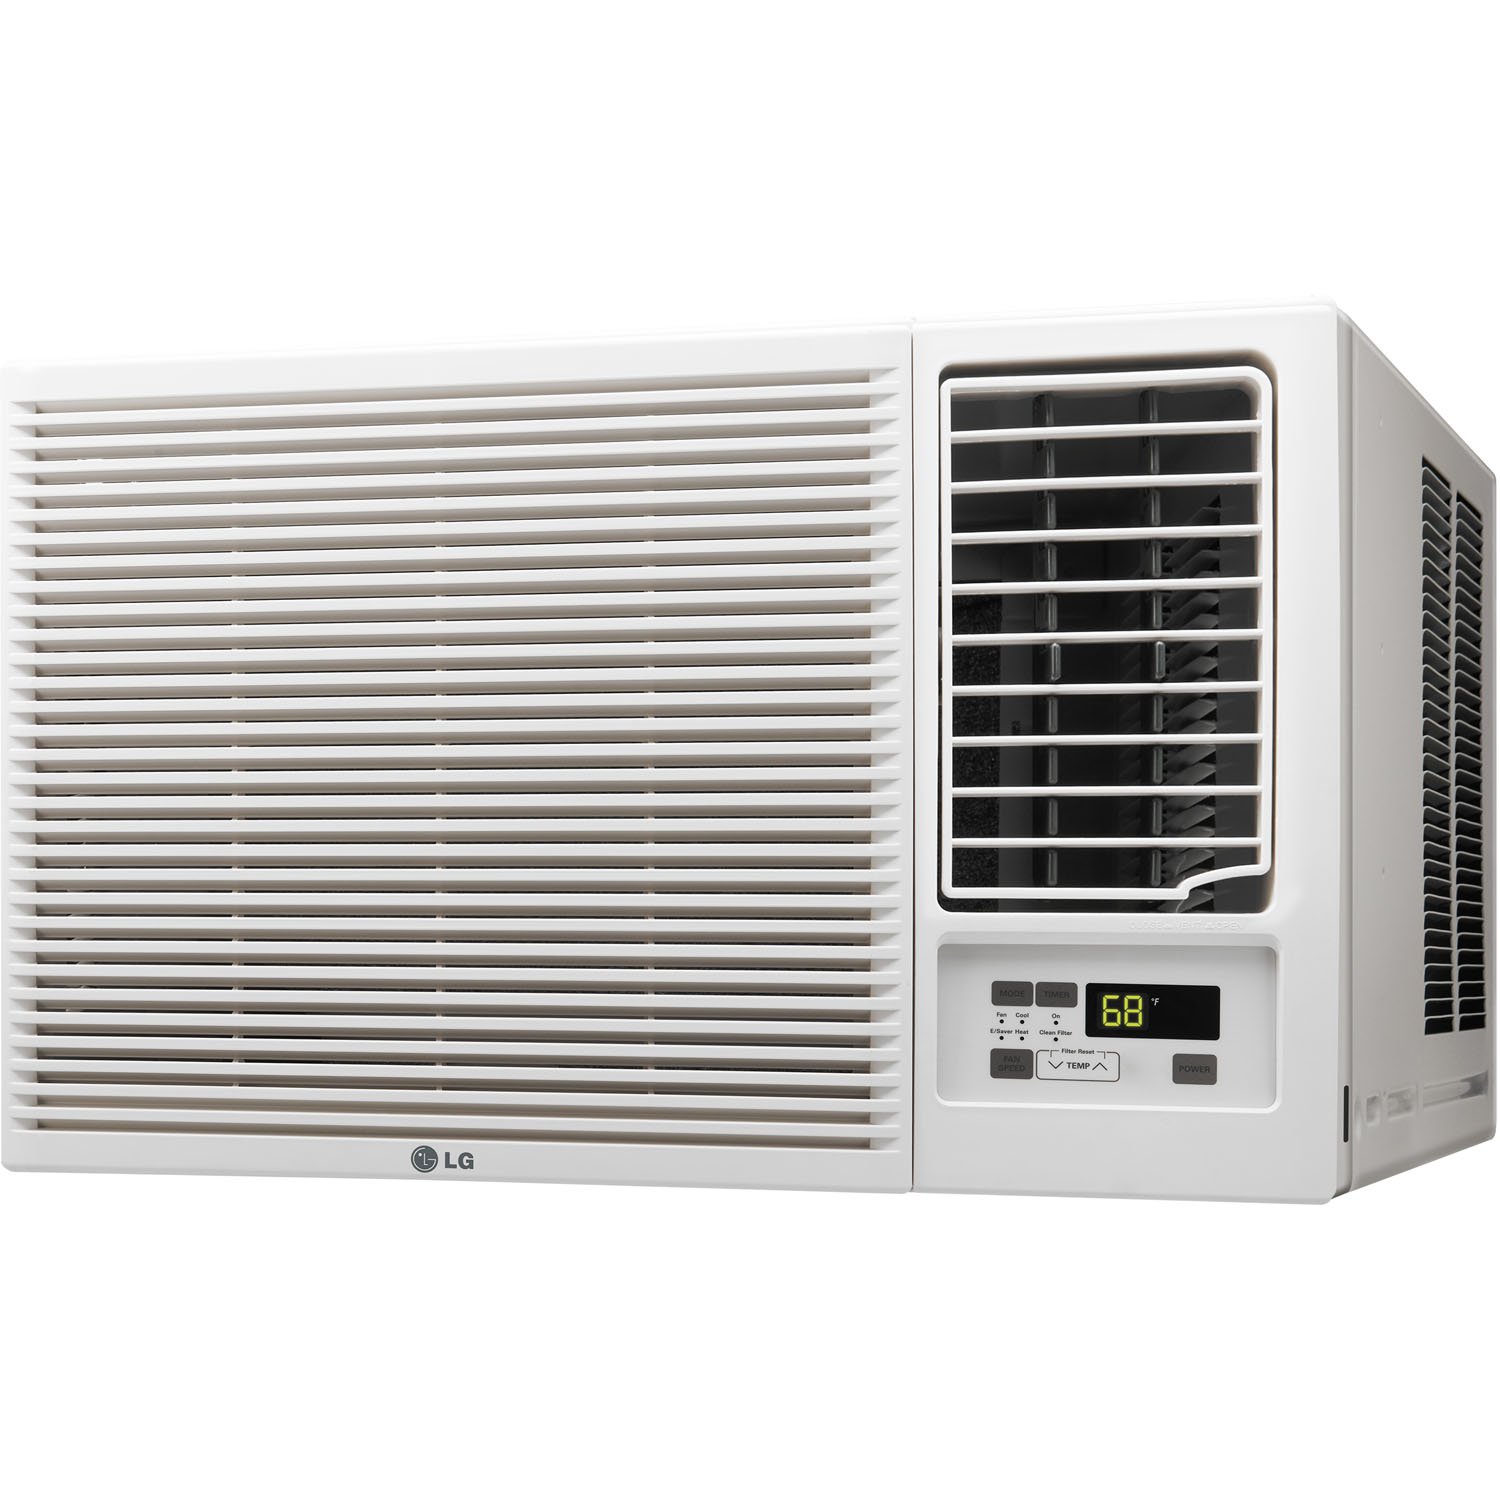 LG 7,500 BTU 115V Window-Mounted Air Conditioner with 3,850 BTU Supplemental Heat Function - image 5 of 11